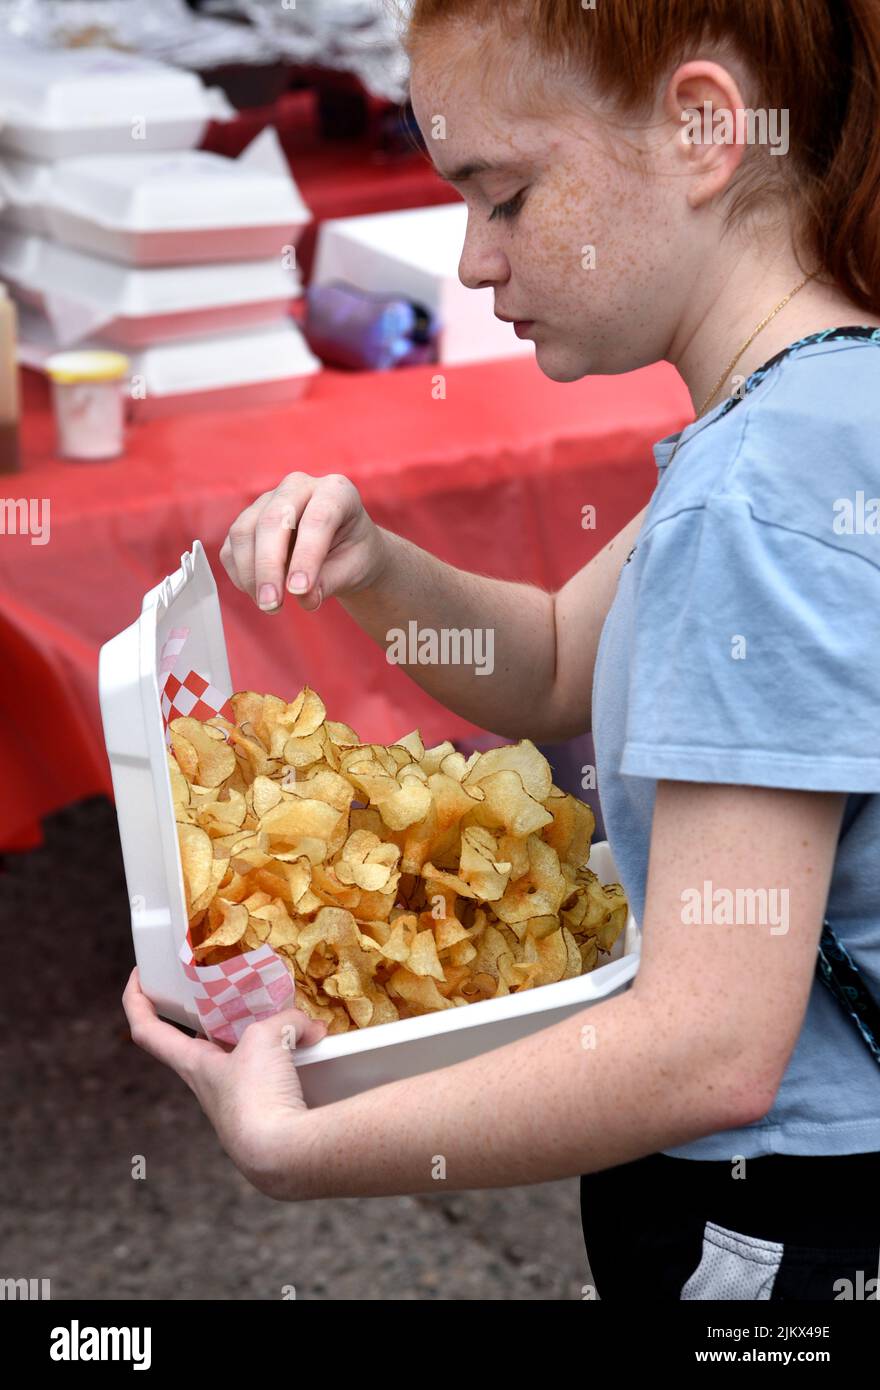 A young girl purchases a carton of ribbon fries from a food vendor at an outdoor festival in Santa Fe, New Mexico. Stock Photo